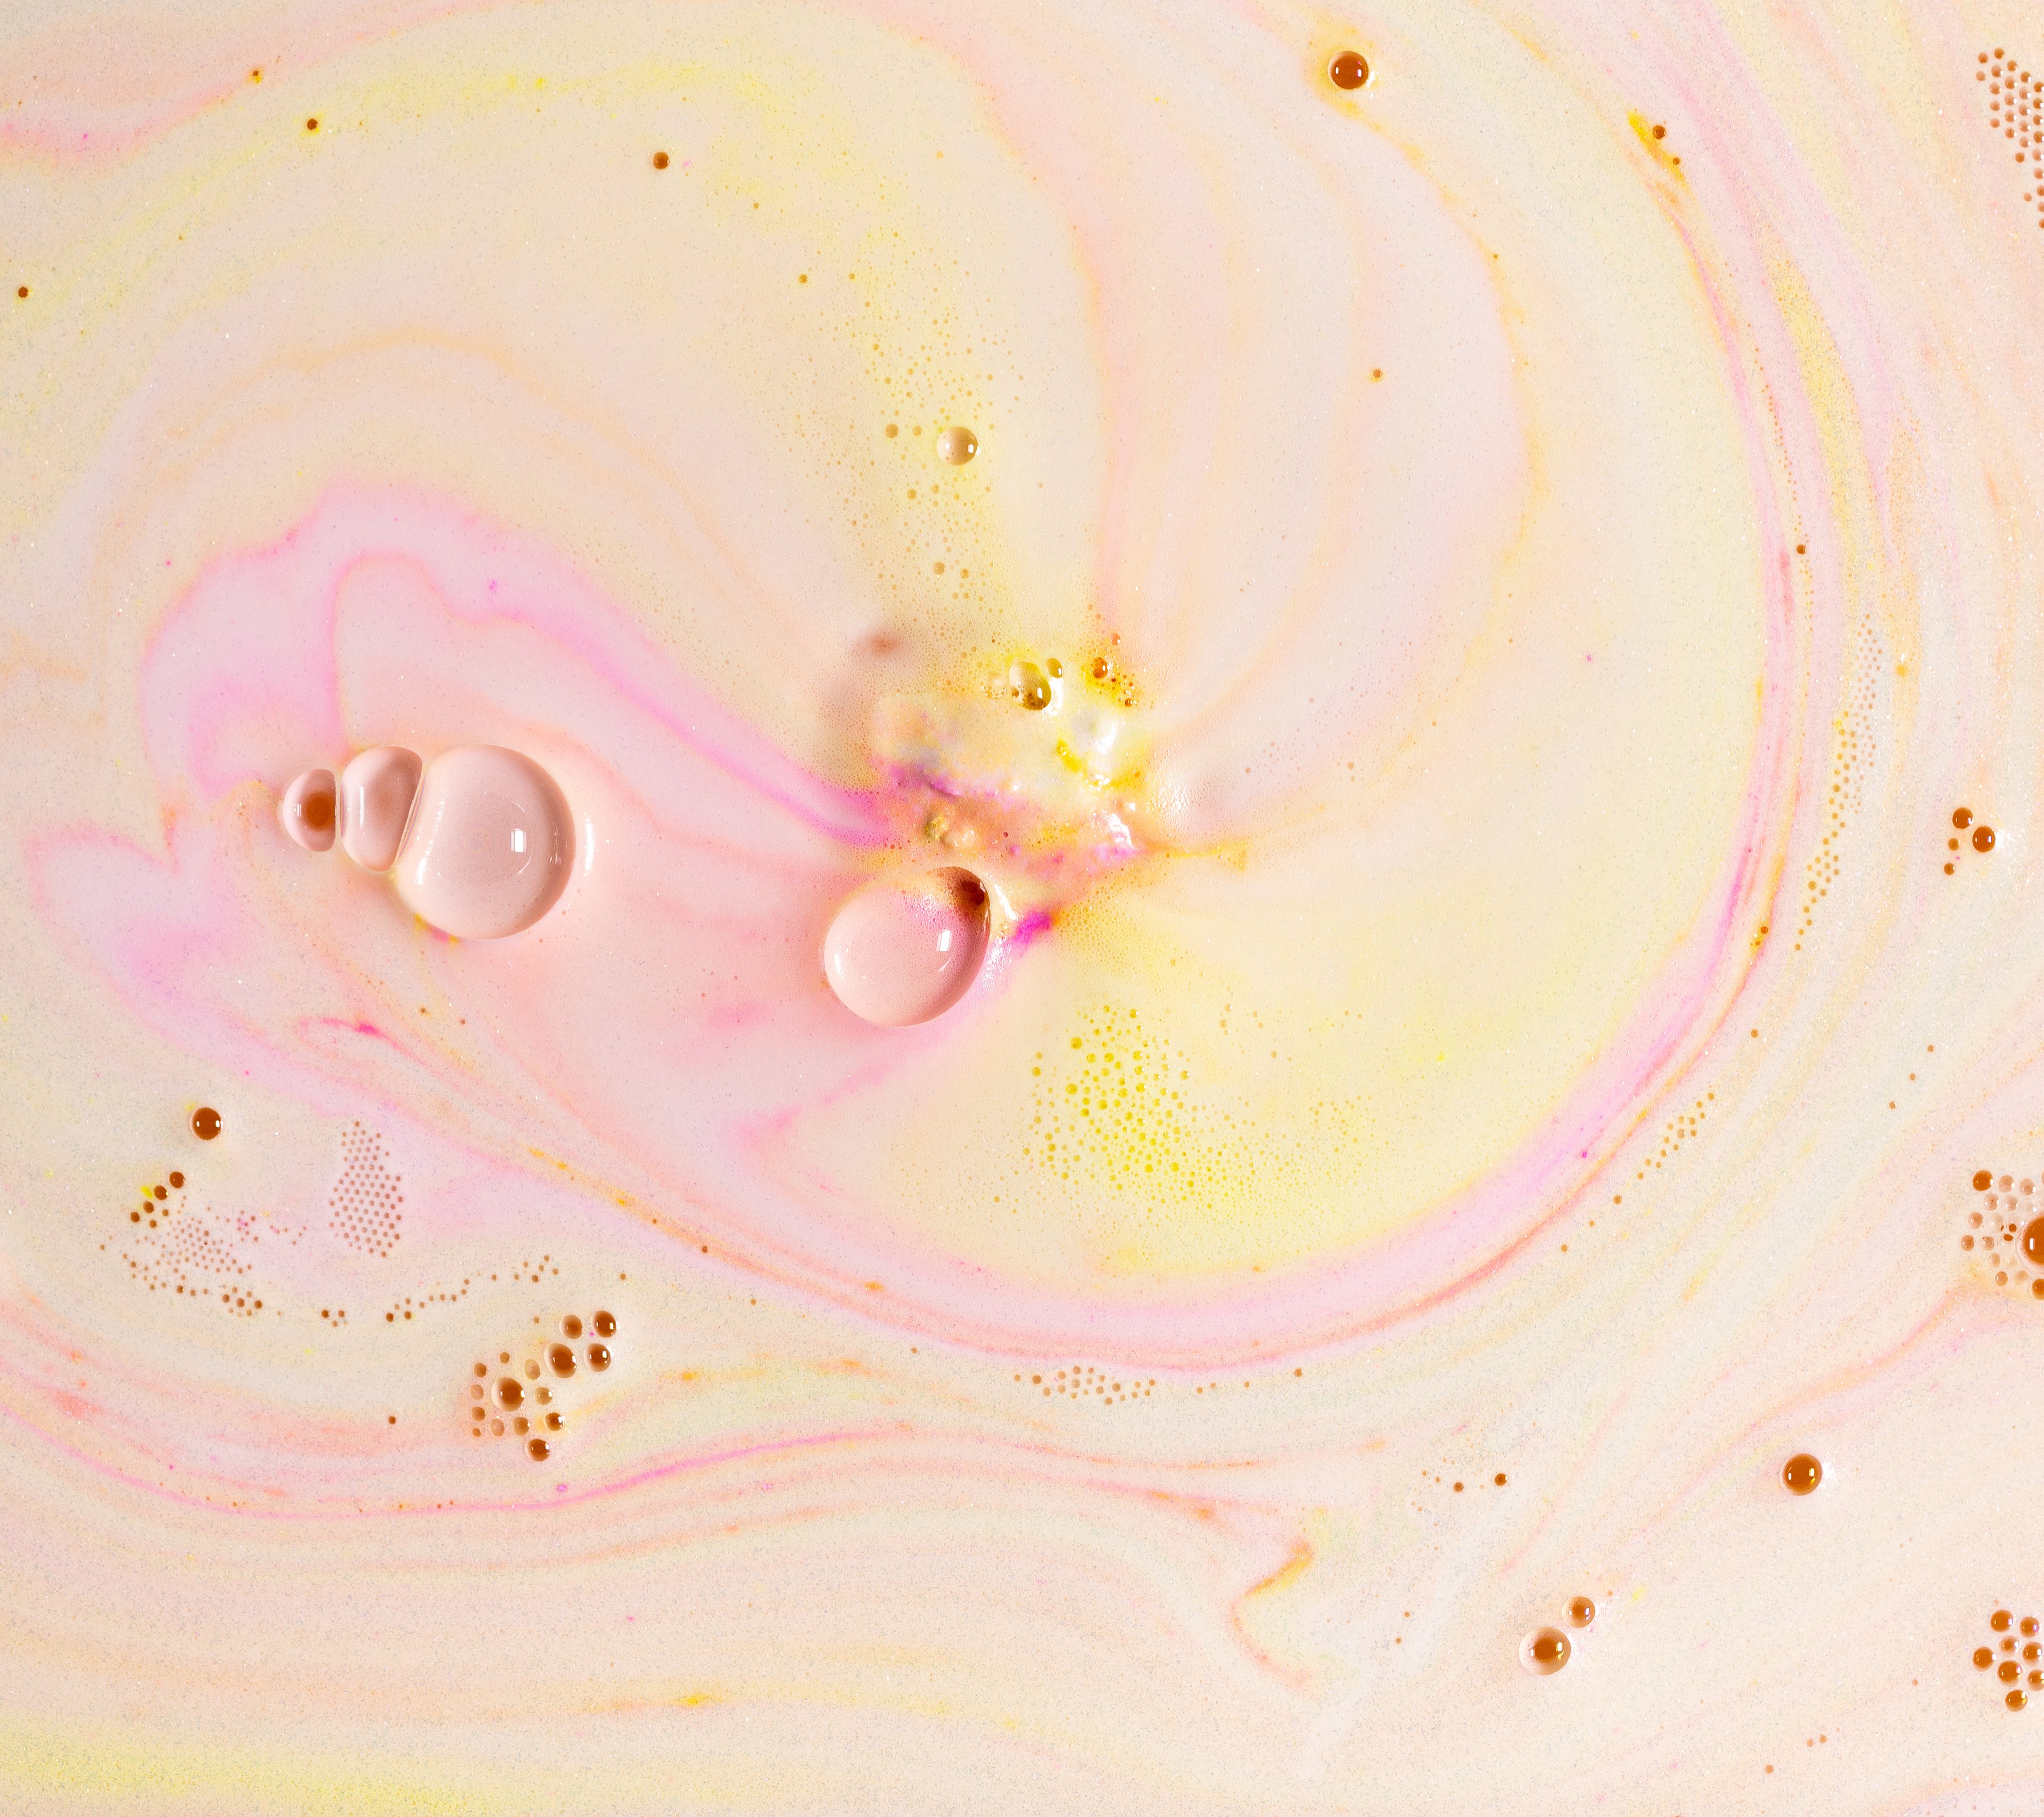 Creamy yellow and pink swirls with hints of orange are created by a fizzing bath bomb, along with a variety of sizes of bubbles.